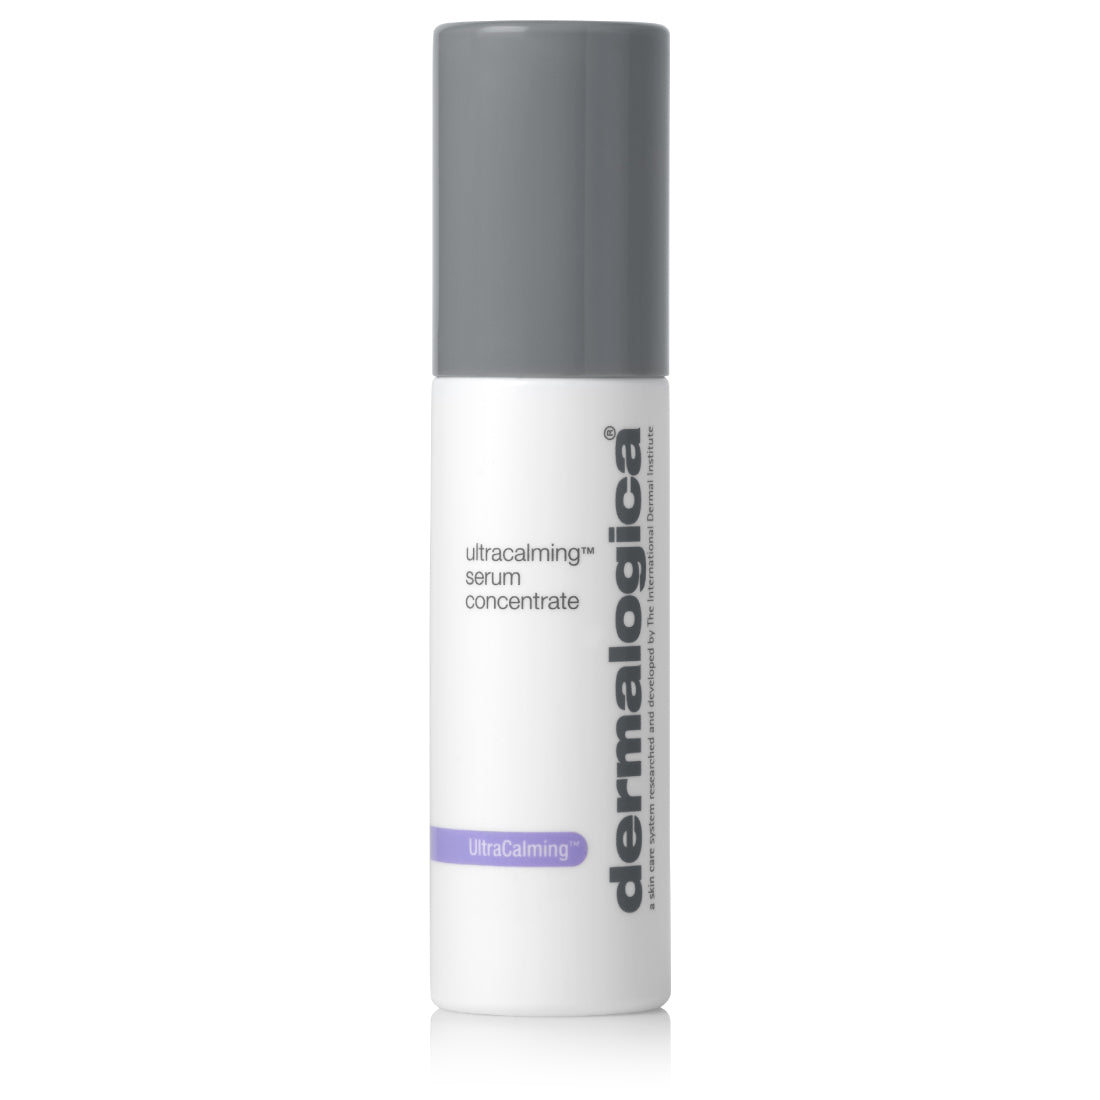 UltraCalming Serum concentrate - 40ml